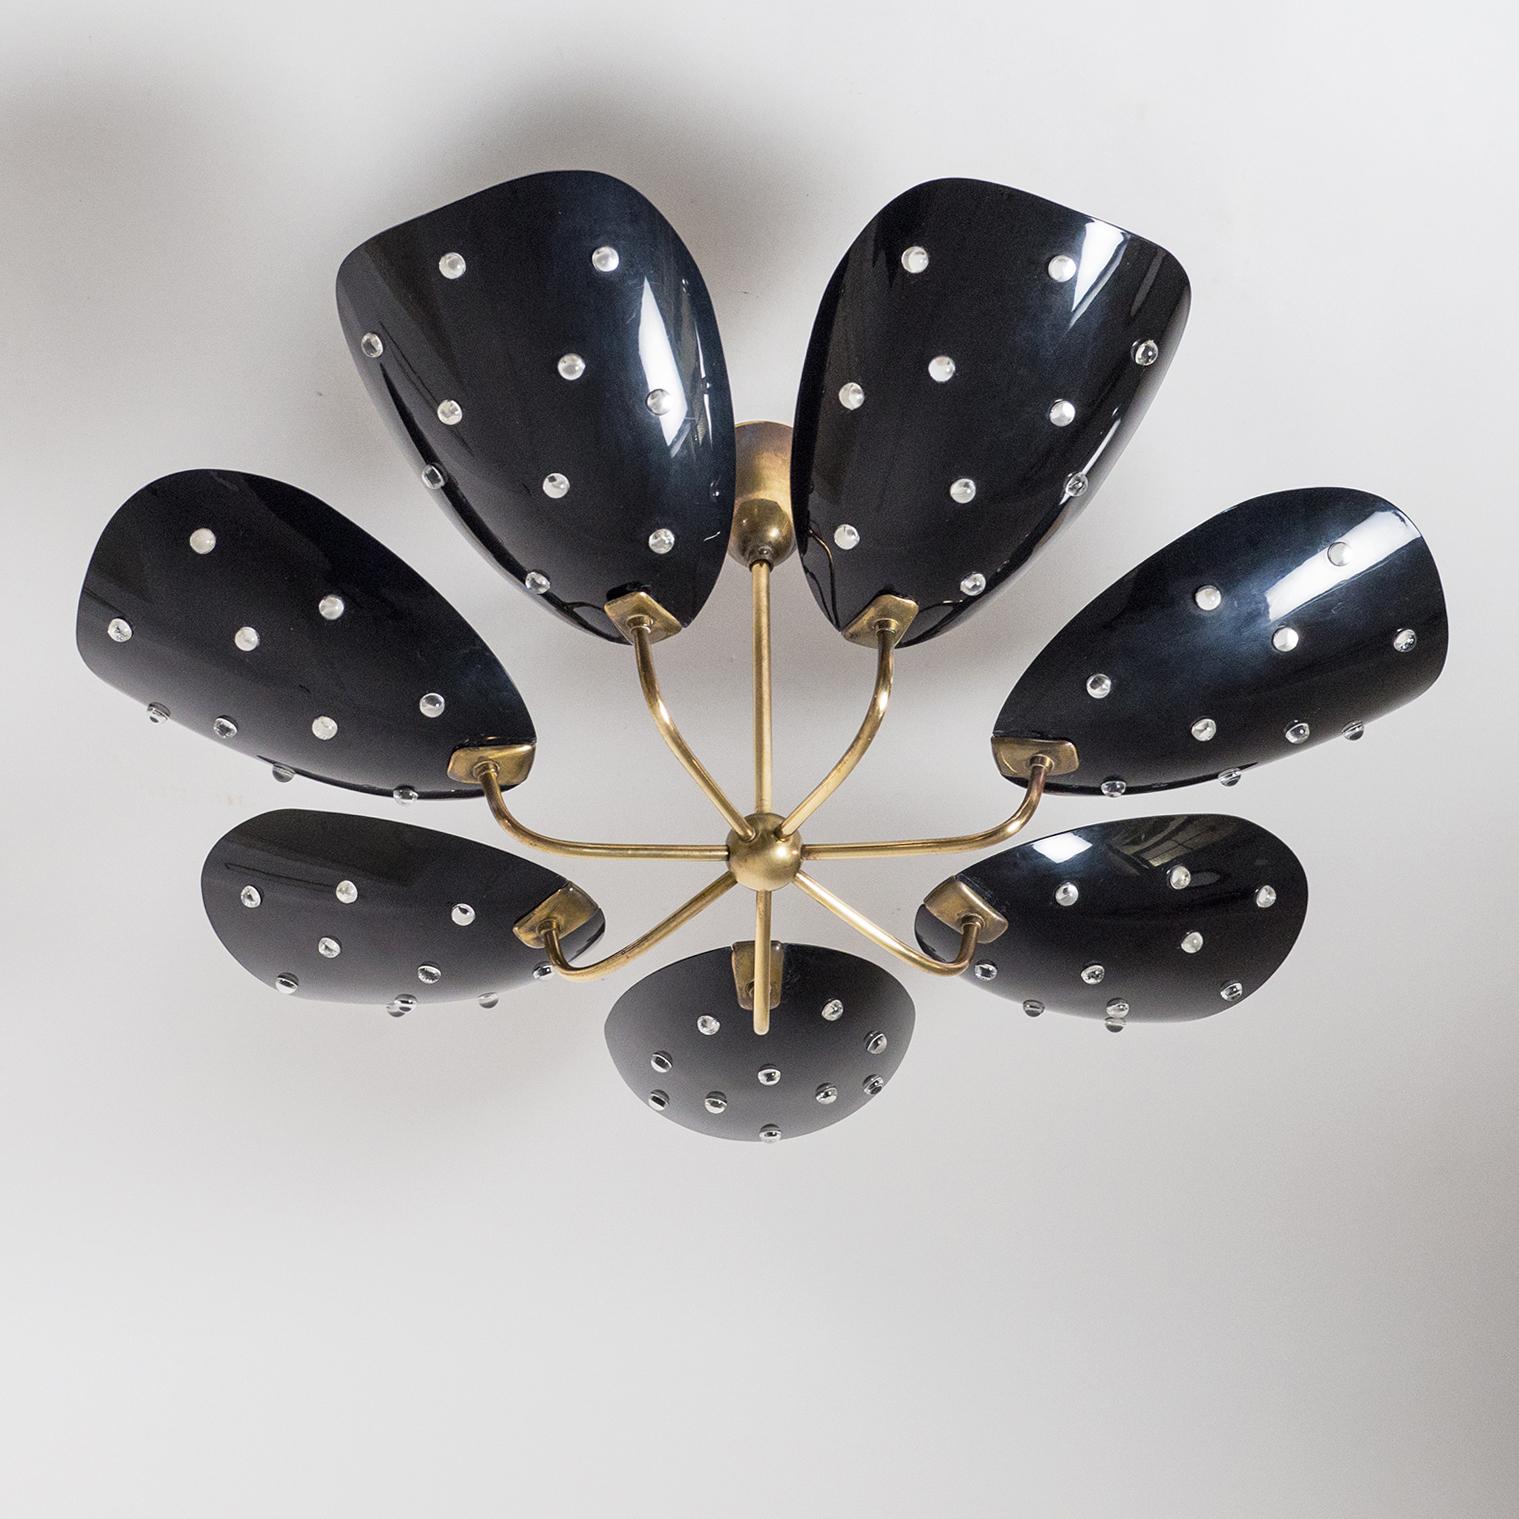 Rare midcentury seven-arm brass ceiling fixture with black acrylic shades. The organically shaped and curved shades have ten large perforations each which are filled with transparent acrylic 'beads'. Good original condition with patina. Each arm has